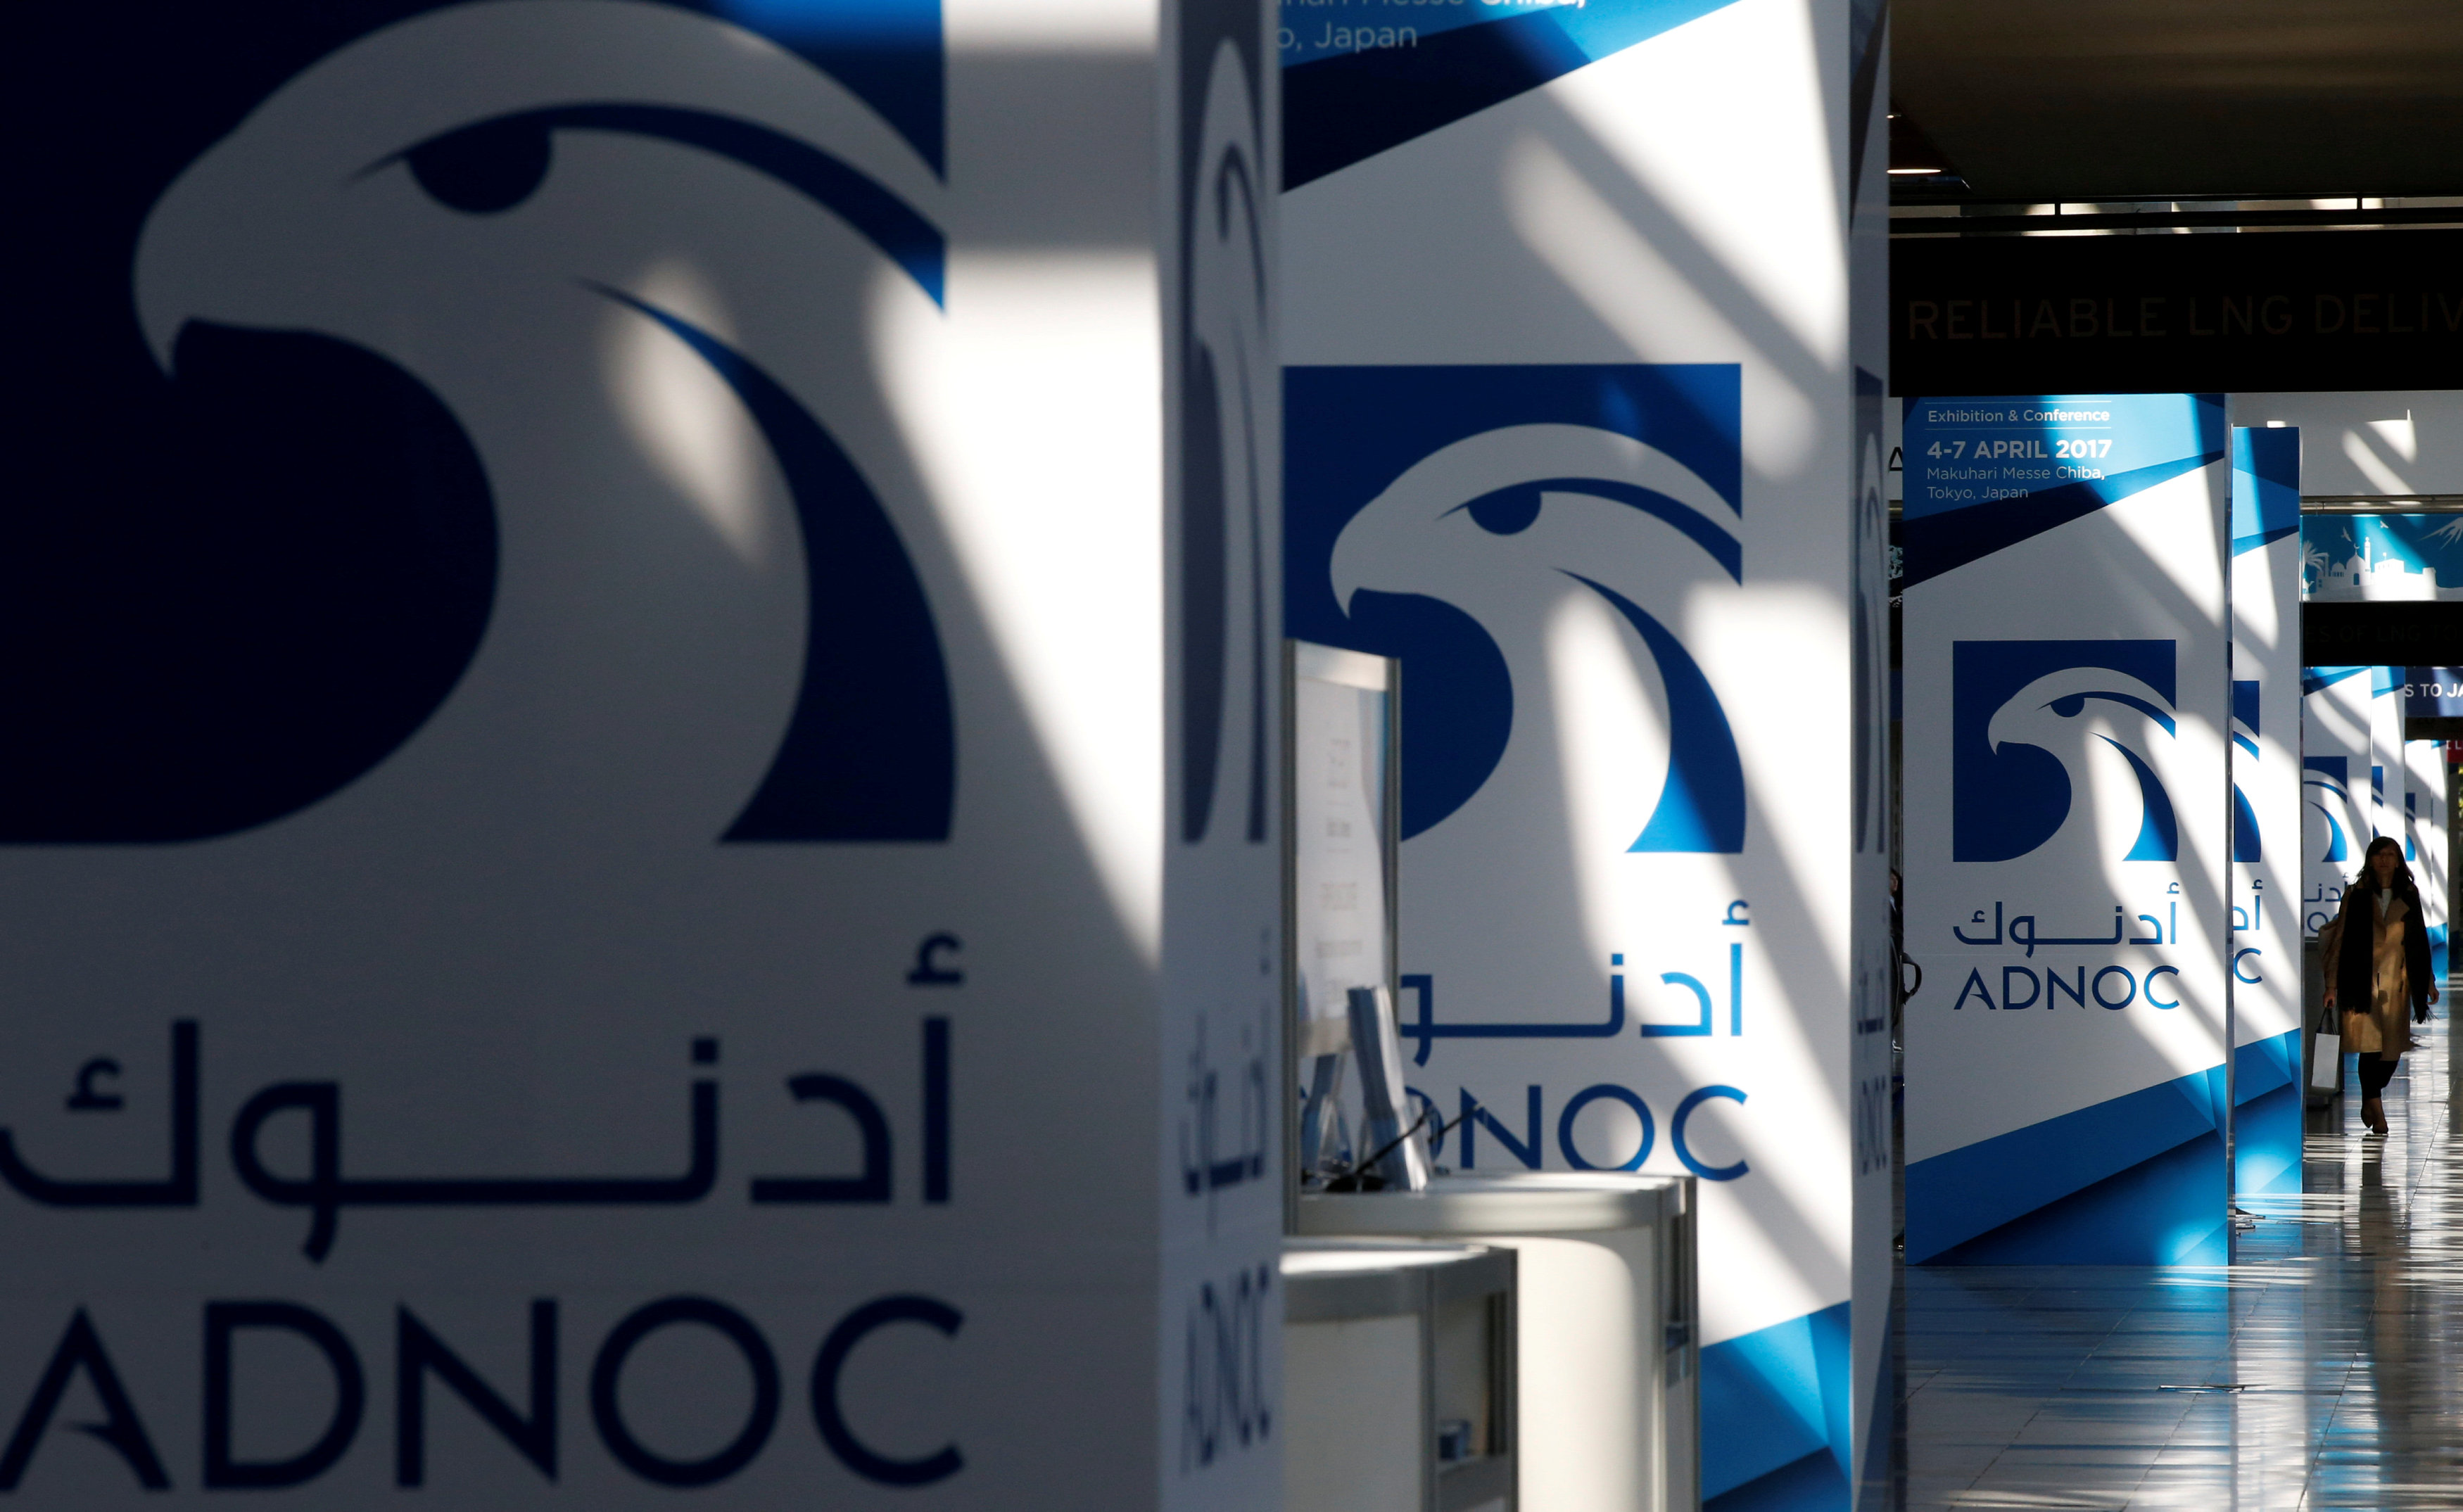 ADNOC signs deal with Cepsa for new LAB facility